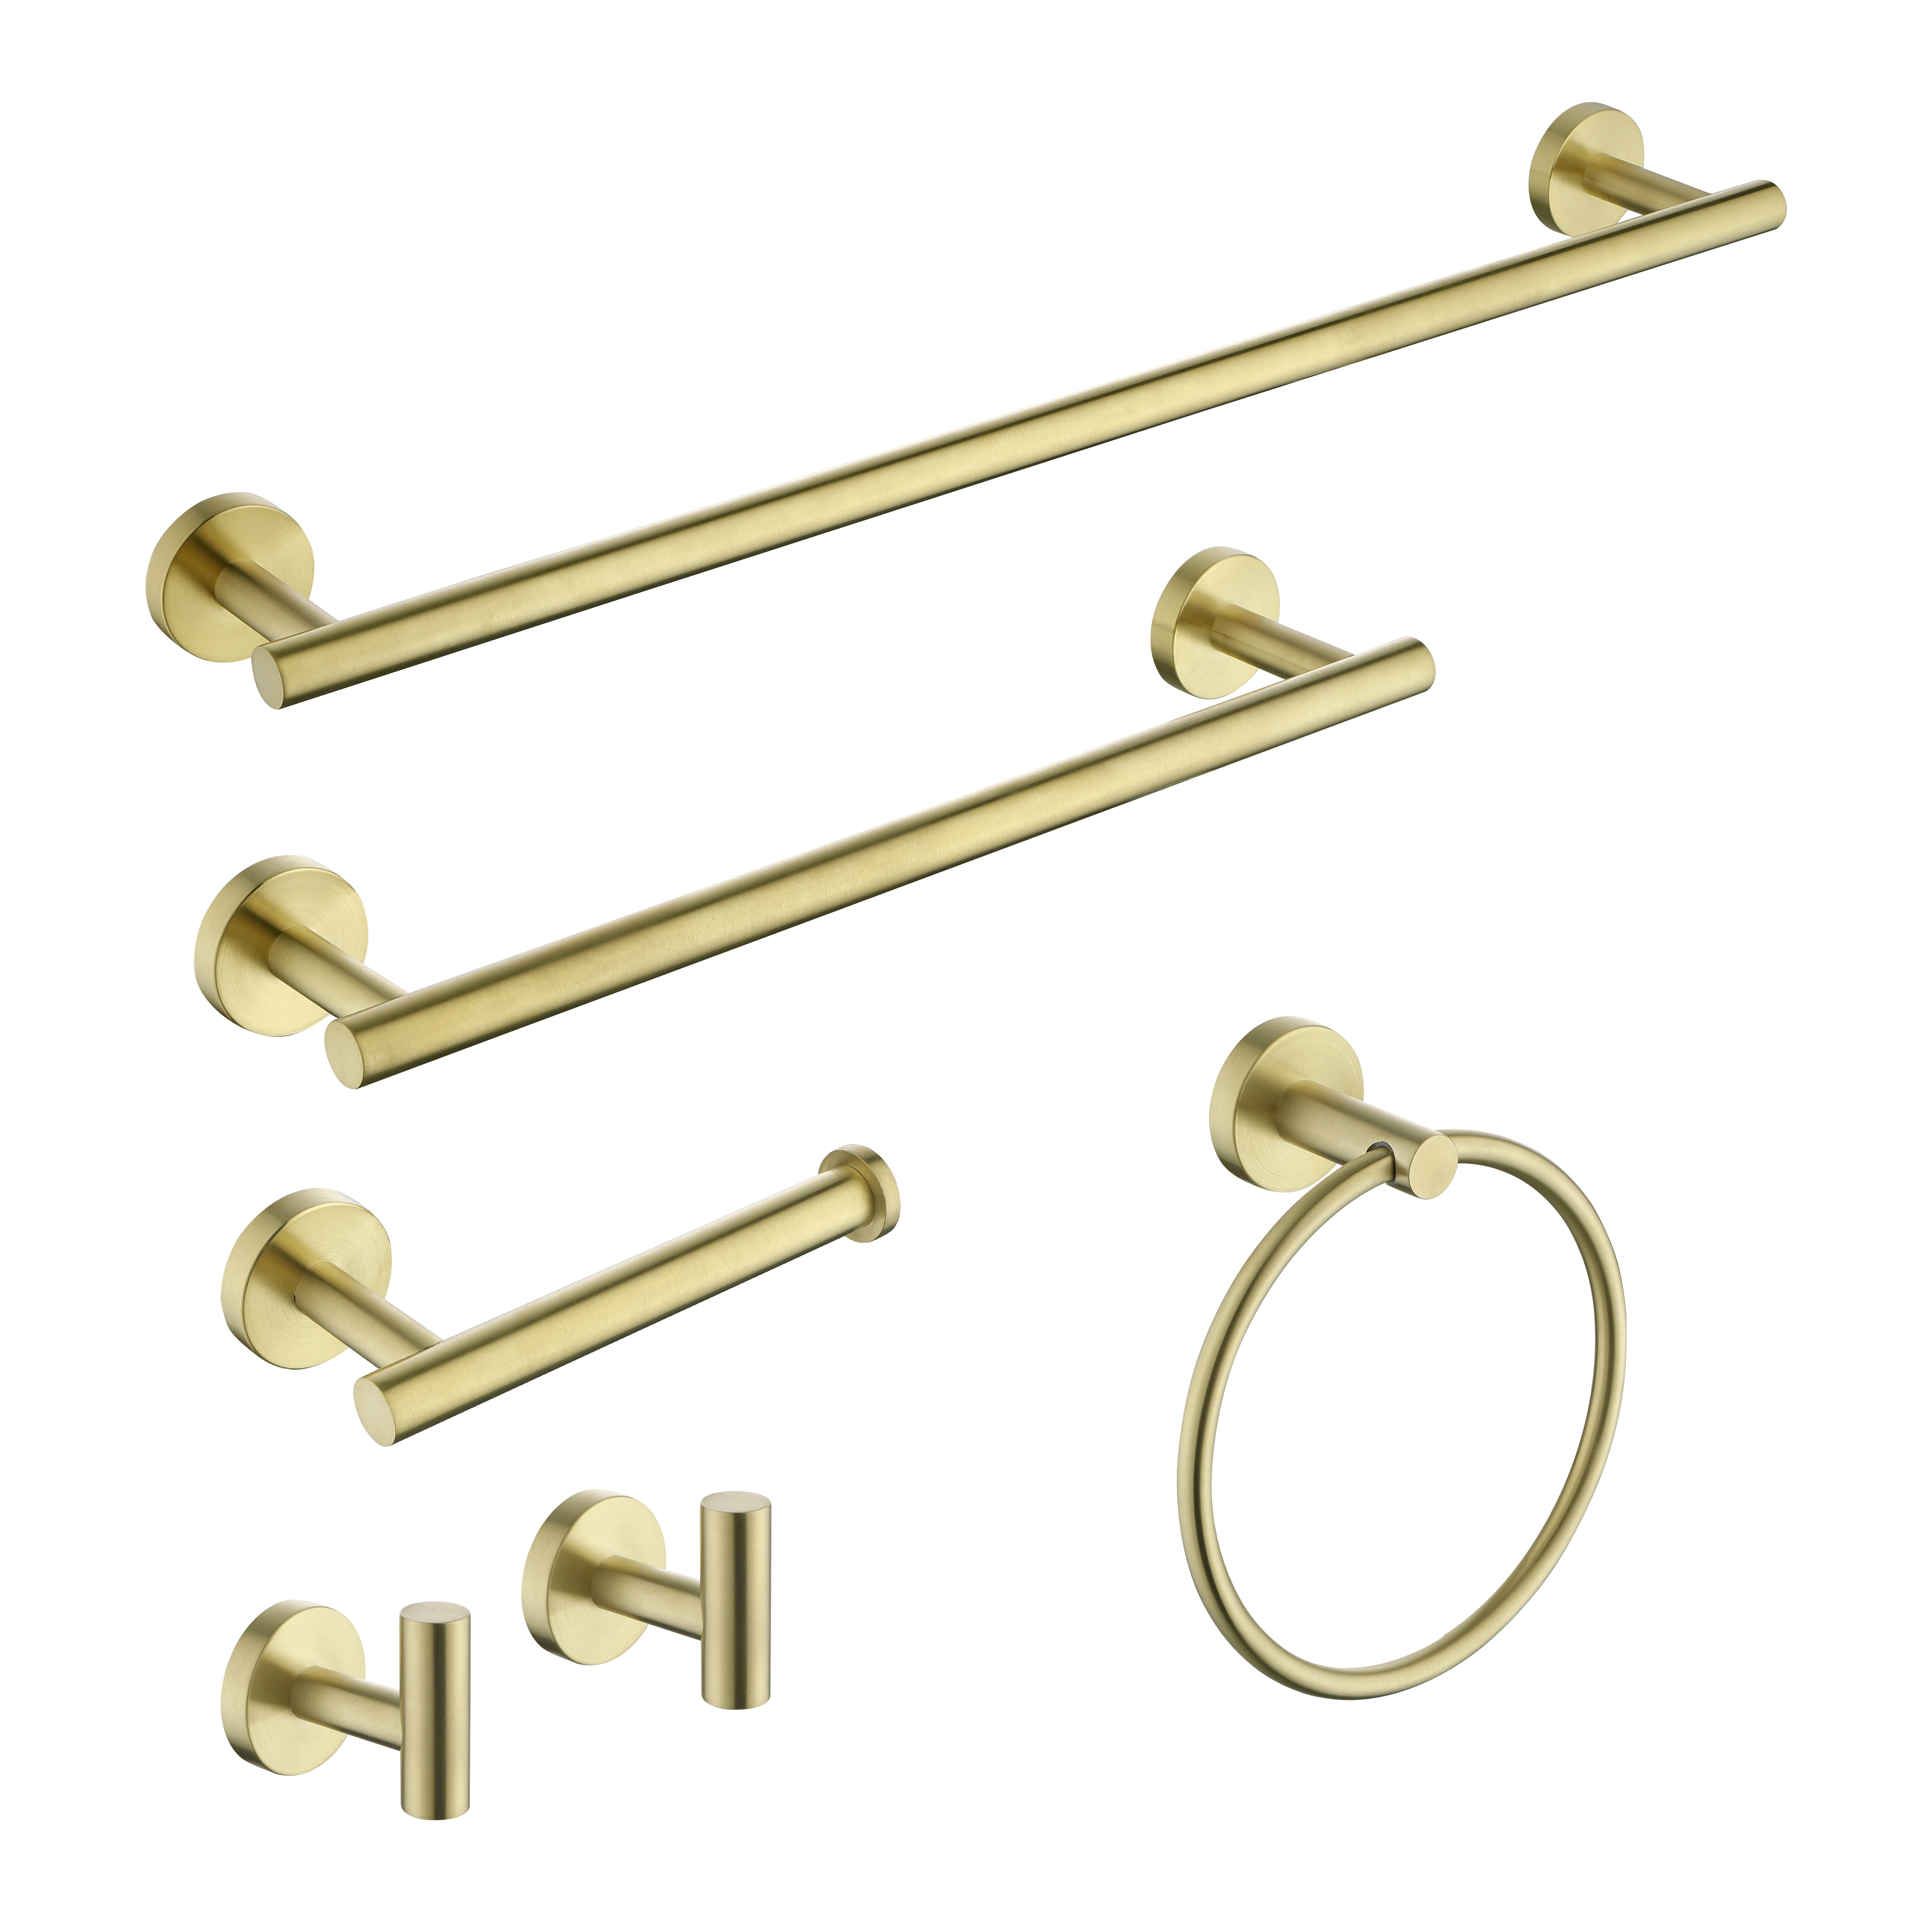 6-Pieces Brushed Gold Bathroom Hardware Set SUS304 Stainless Steel Round Wall Mounted Includes Hand Towel Bar,Toilet Paper Holder,Robe Towel Hooks,Bathroom Accessories Kit-CASAINC